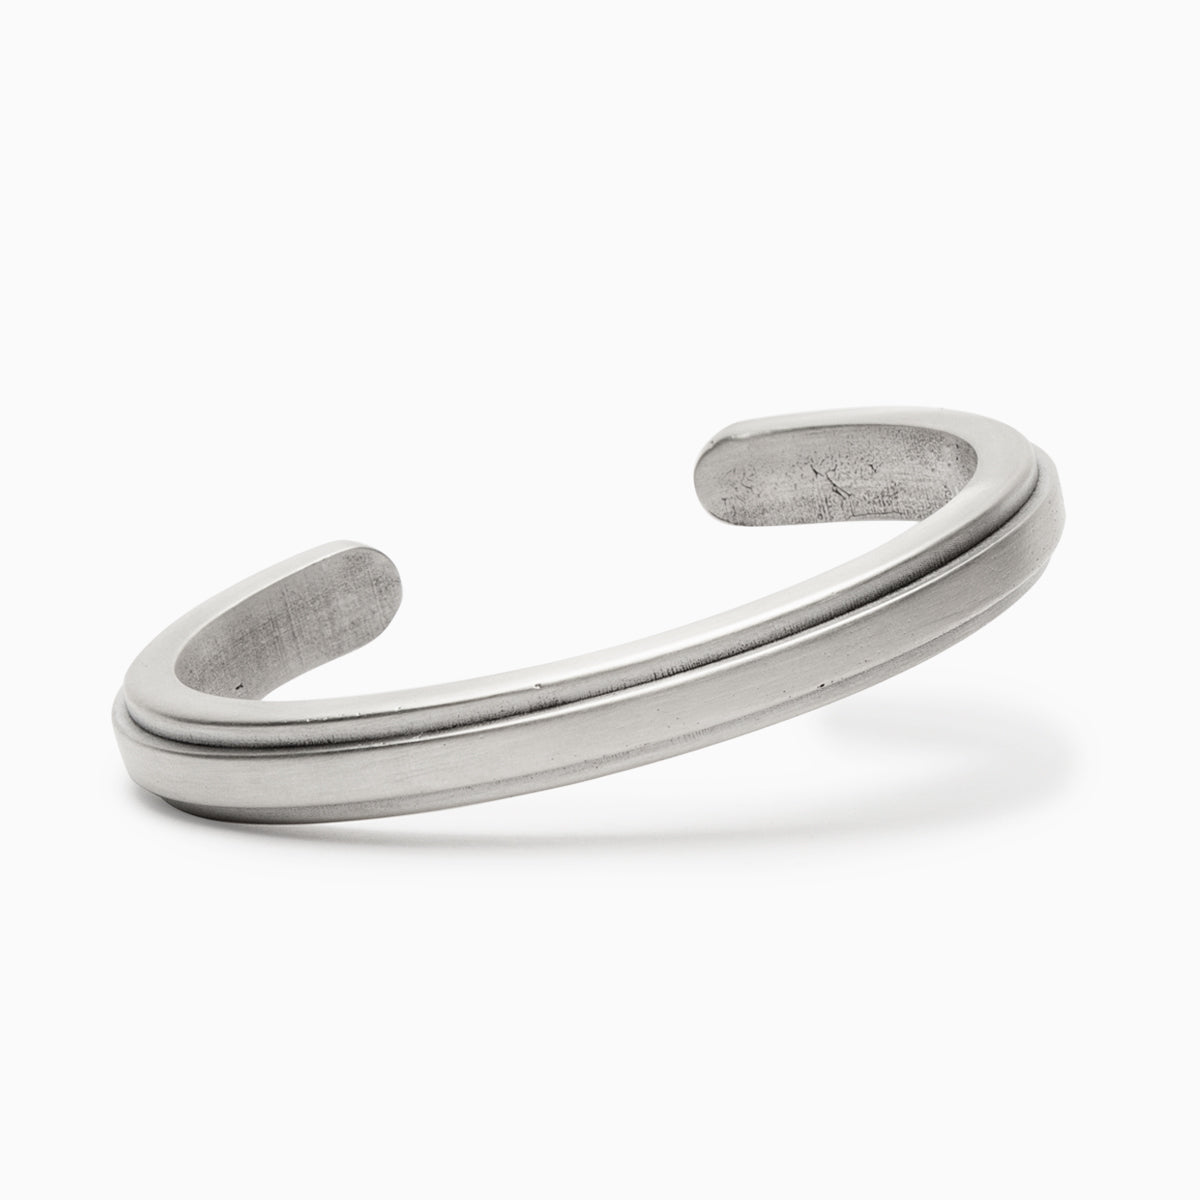 A squared off solid sterling silver cuff with an exterior band of bronze running down the center. The Amanca Cuff is designed and handcrafted in Portland, Oregon.